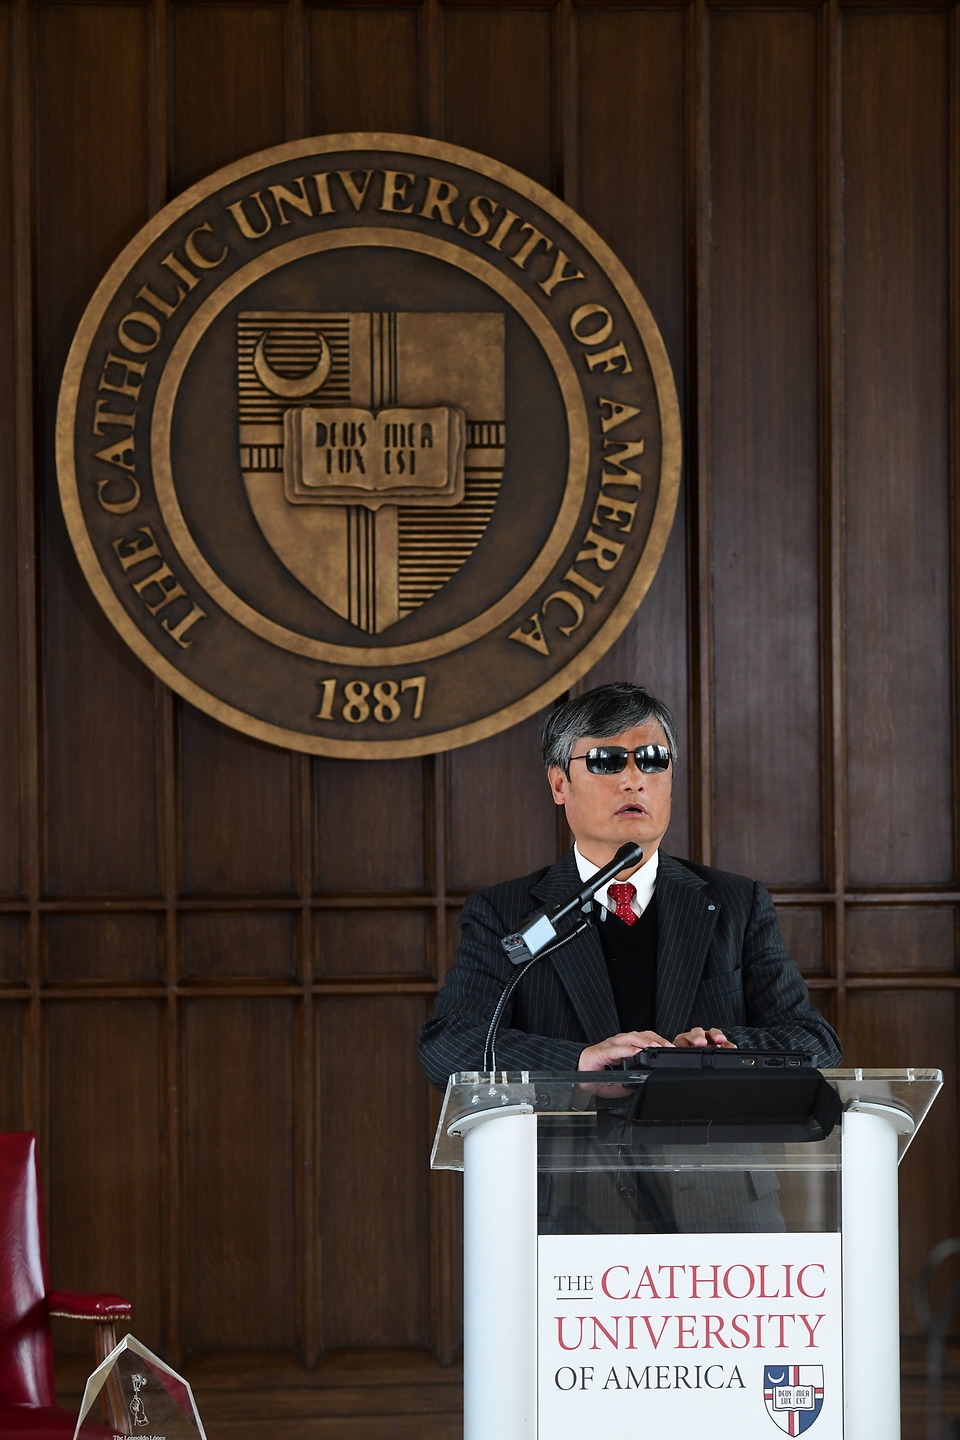 Chen Guangcheng gives a speech in Heritage Hall at The Catholic University of America